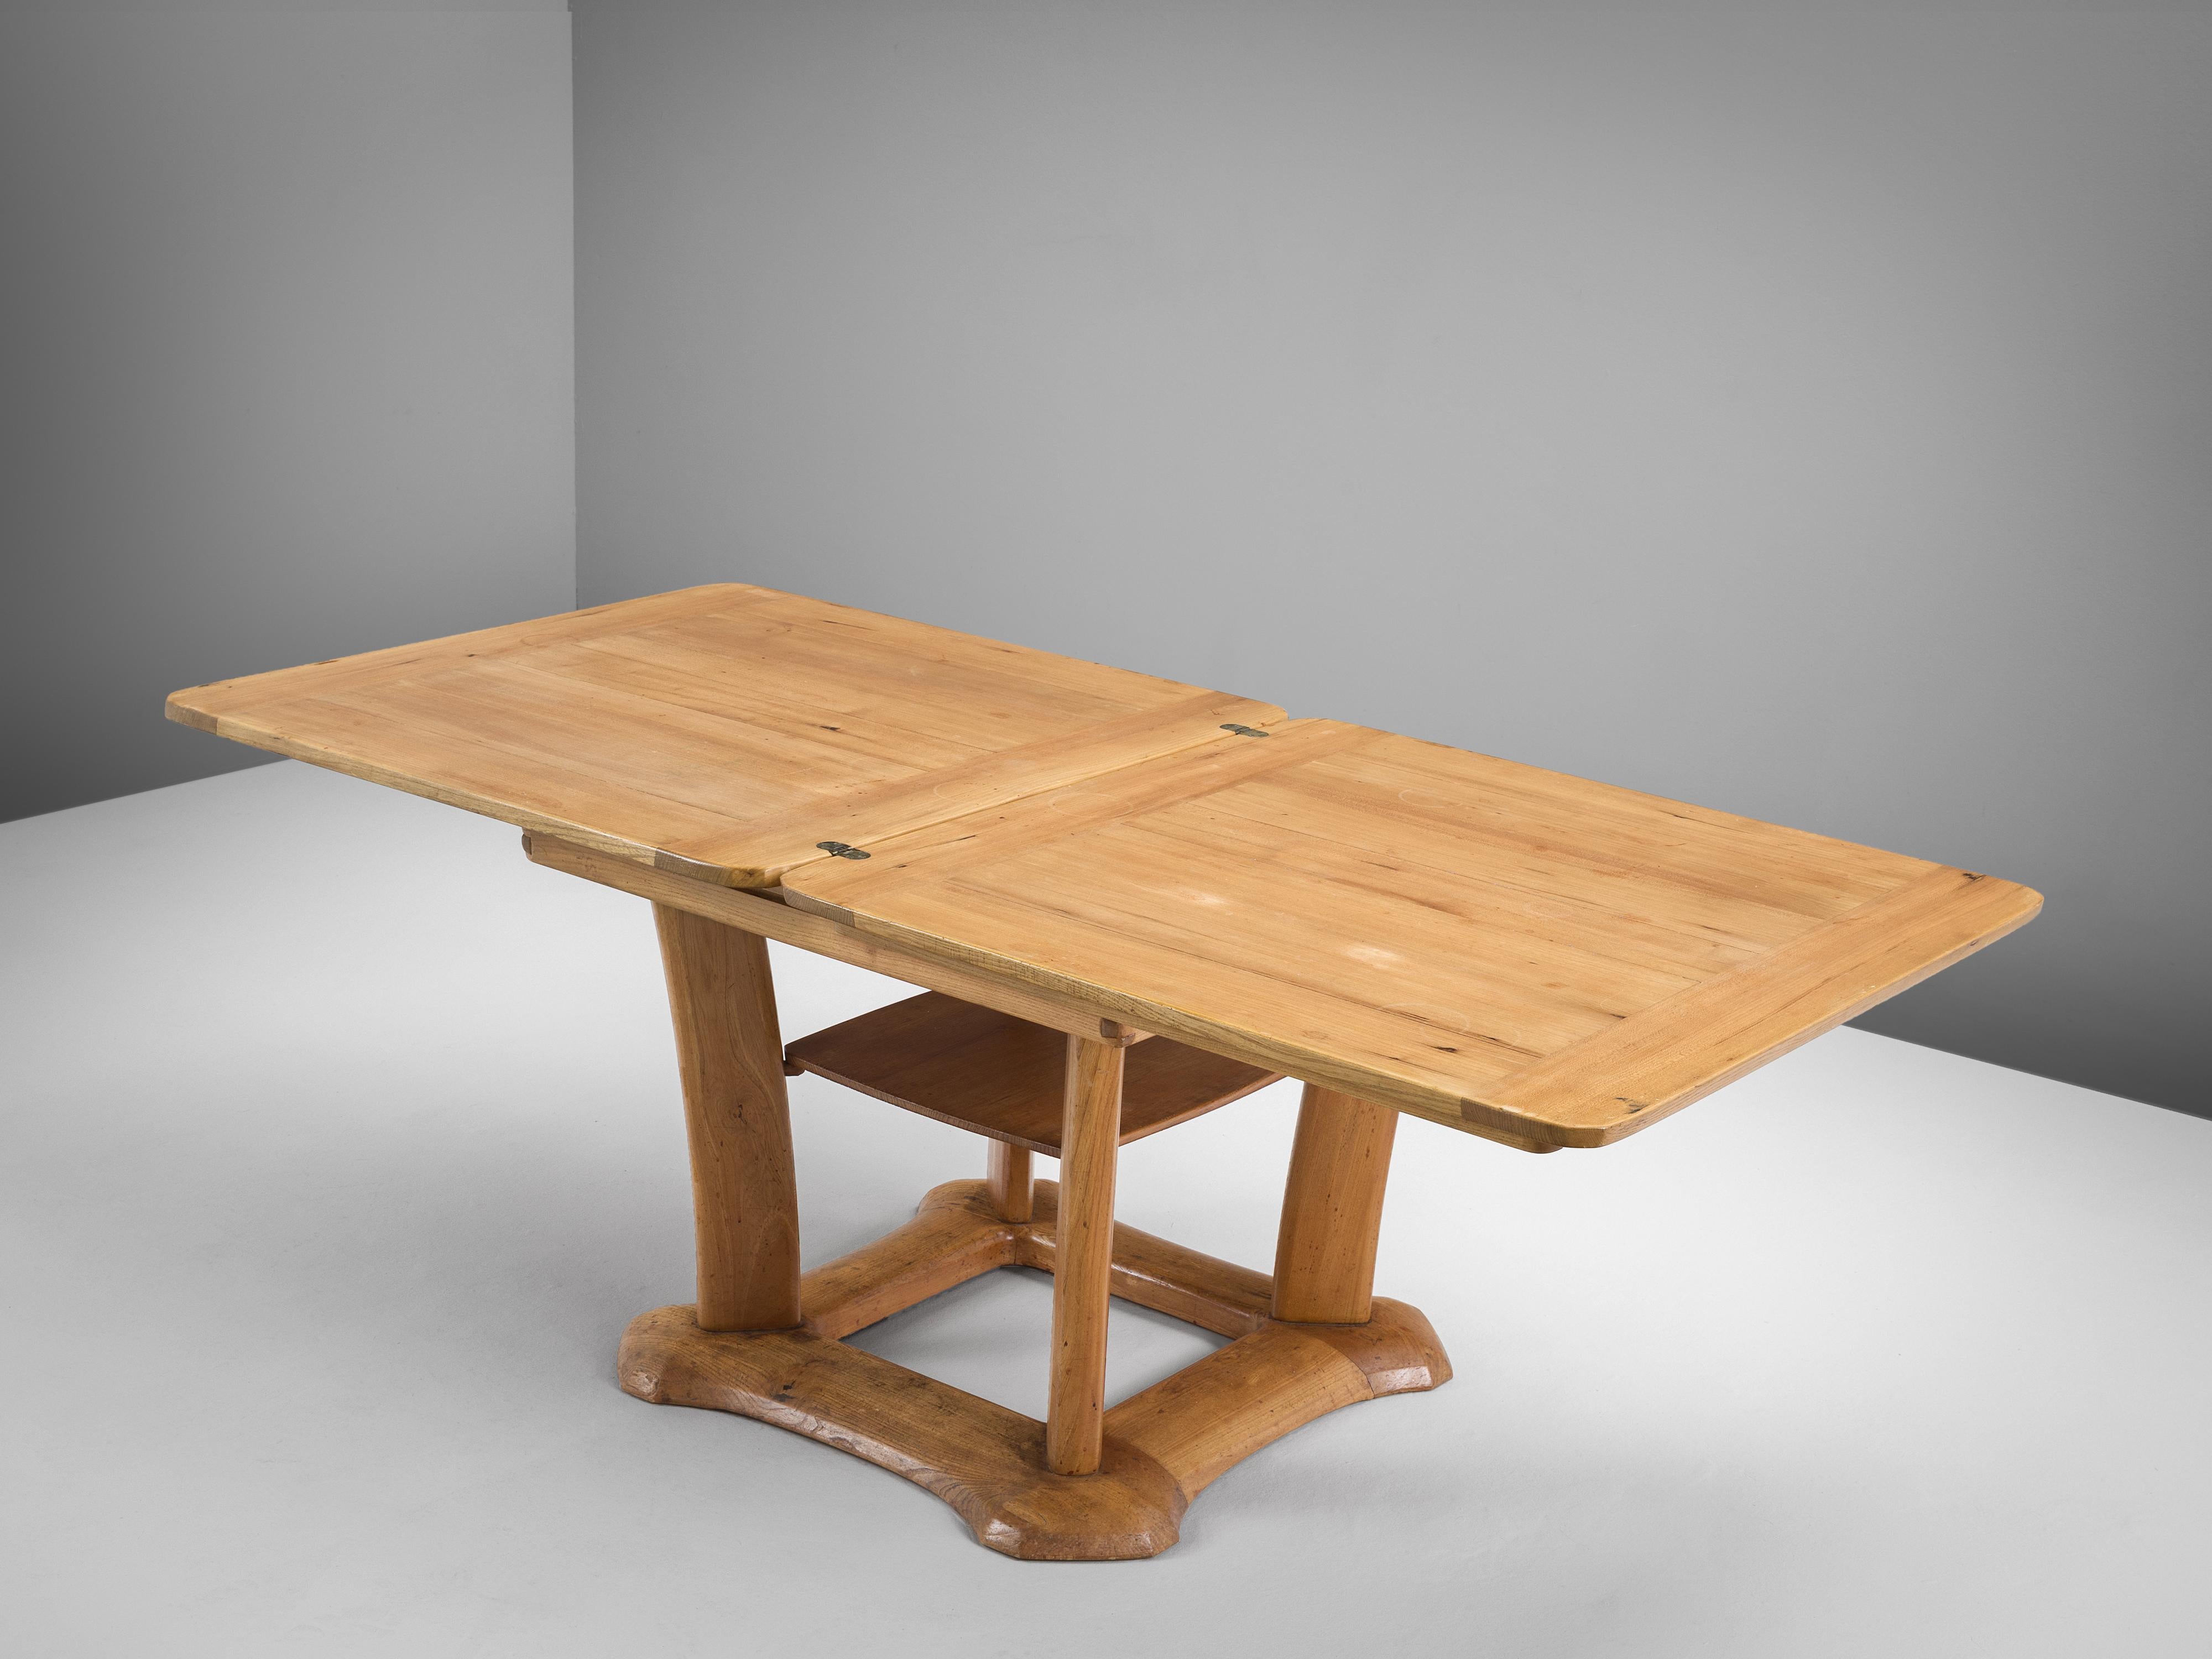 Franz Xaver Sproll, dining table, elm, brass, Switzerland, 1940s

This multifunctional dining table is a creation by Swiss designer Franz Xaver Sproll. In its most compact form design contains a square-shaped top. To expand its size, the top can be